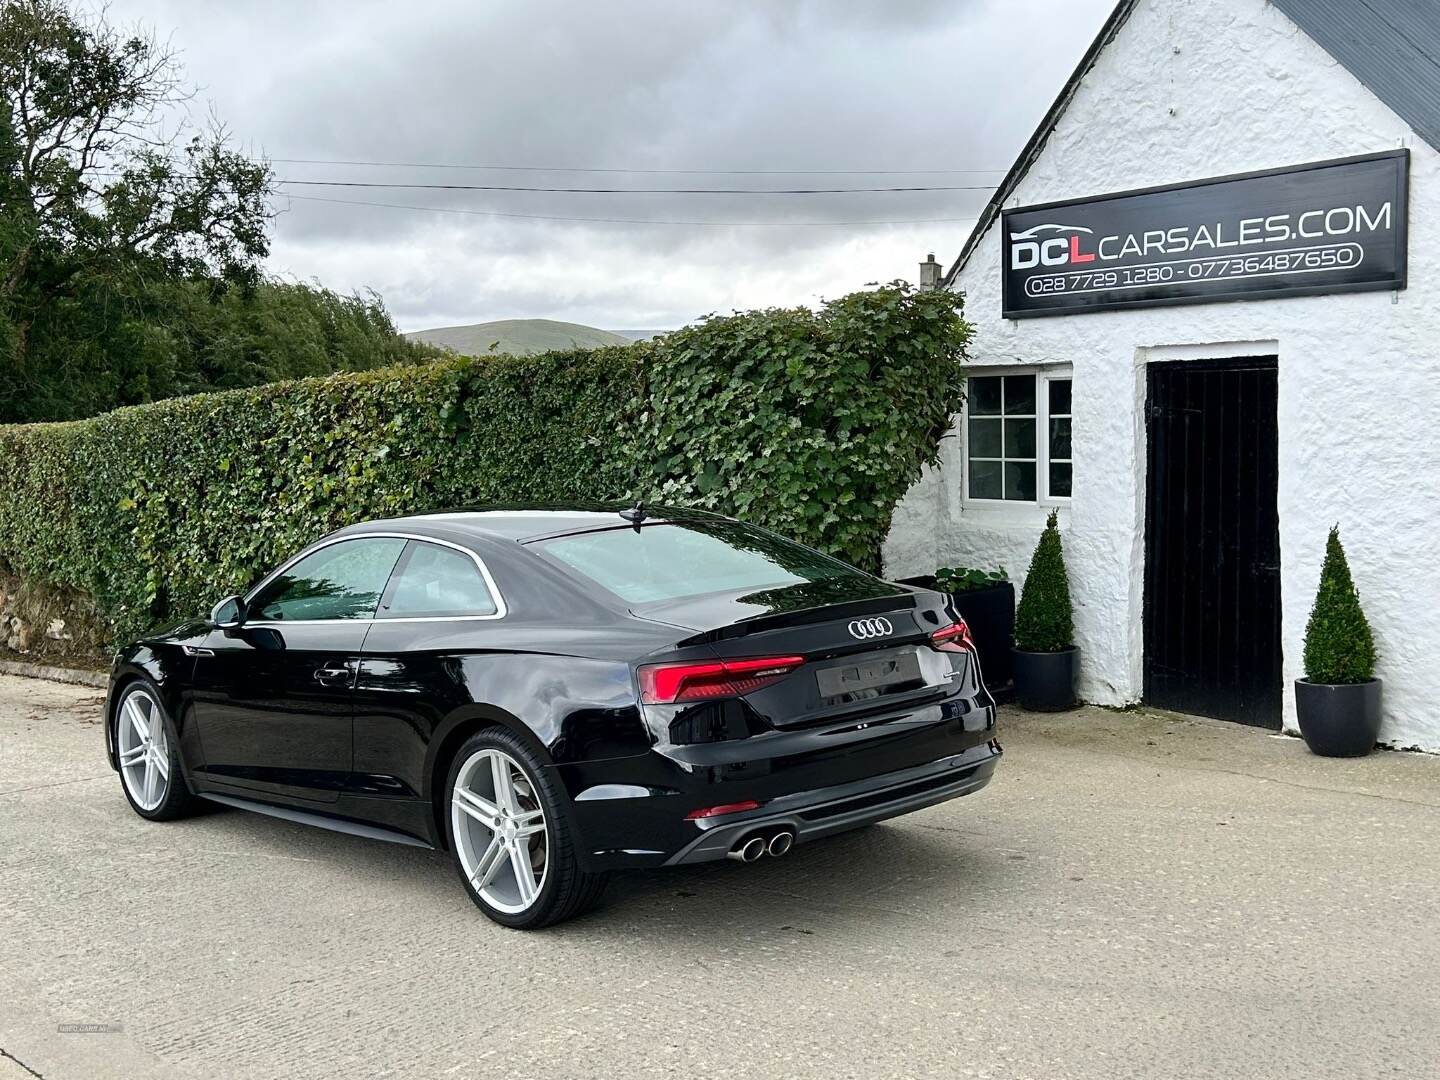 Audi A5 DIESEL COUPE in Derry / Londonderry